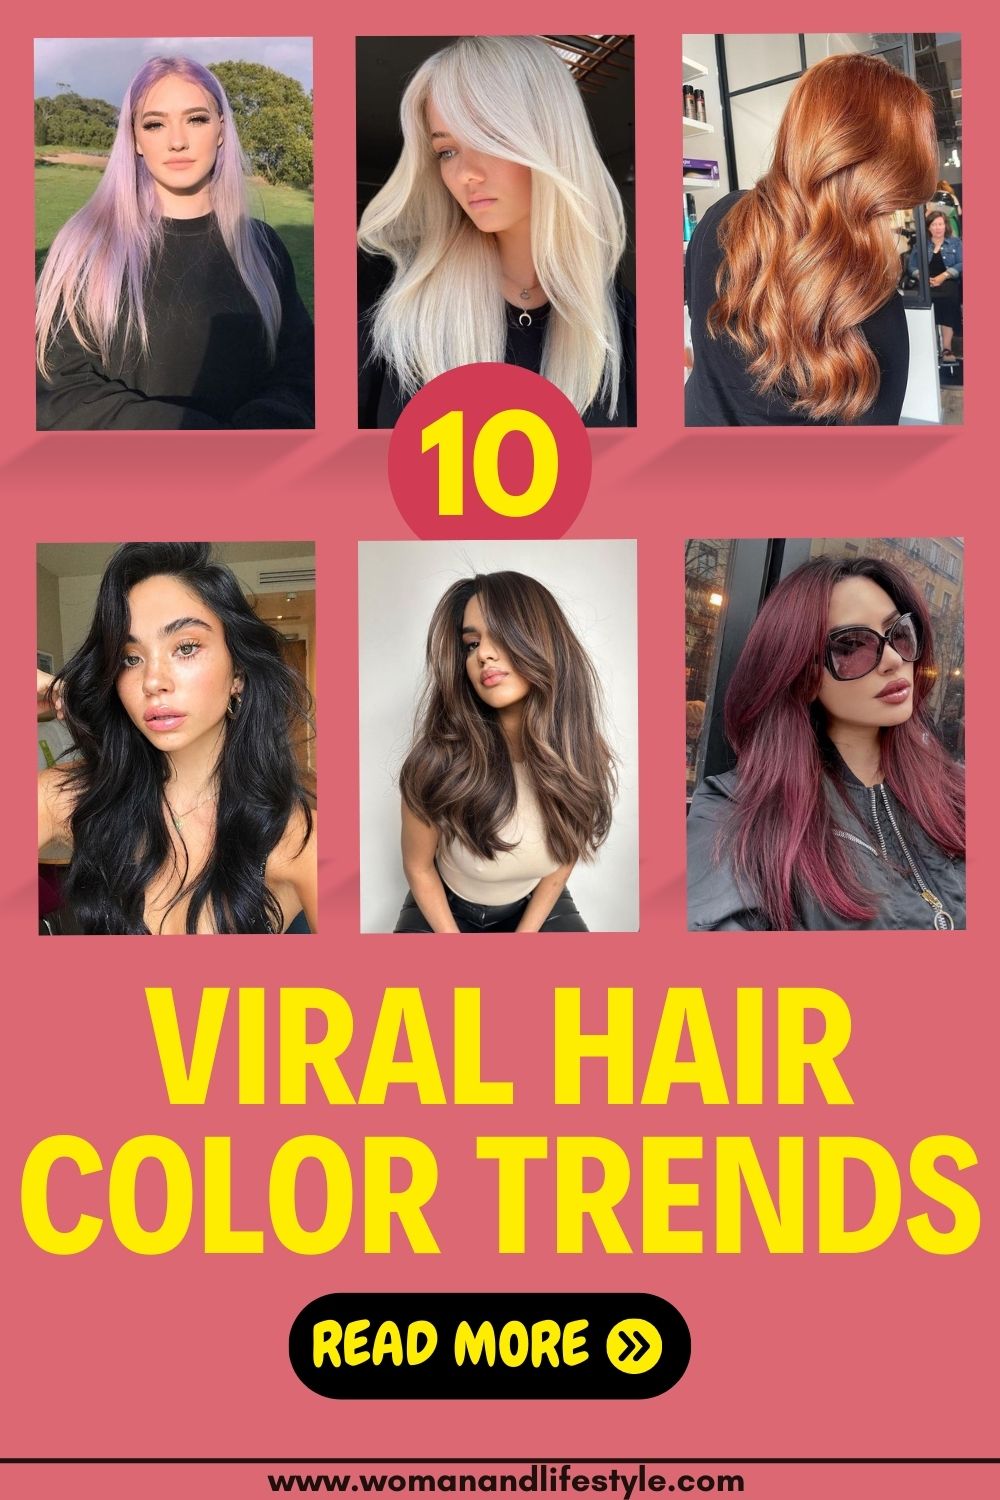 Hair-Color-Trends-Pin